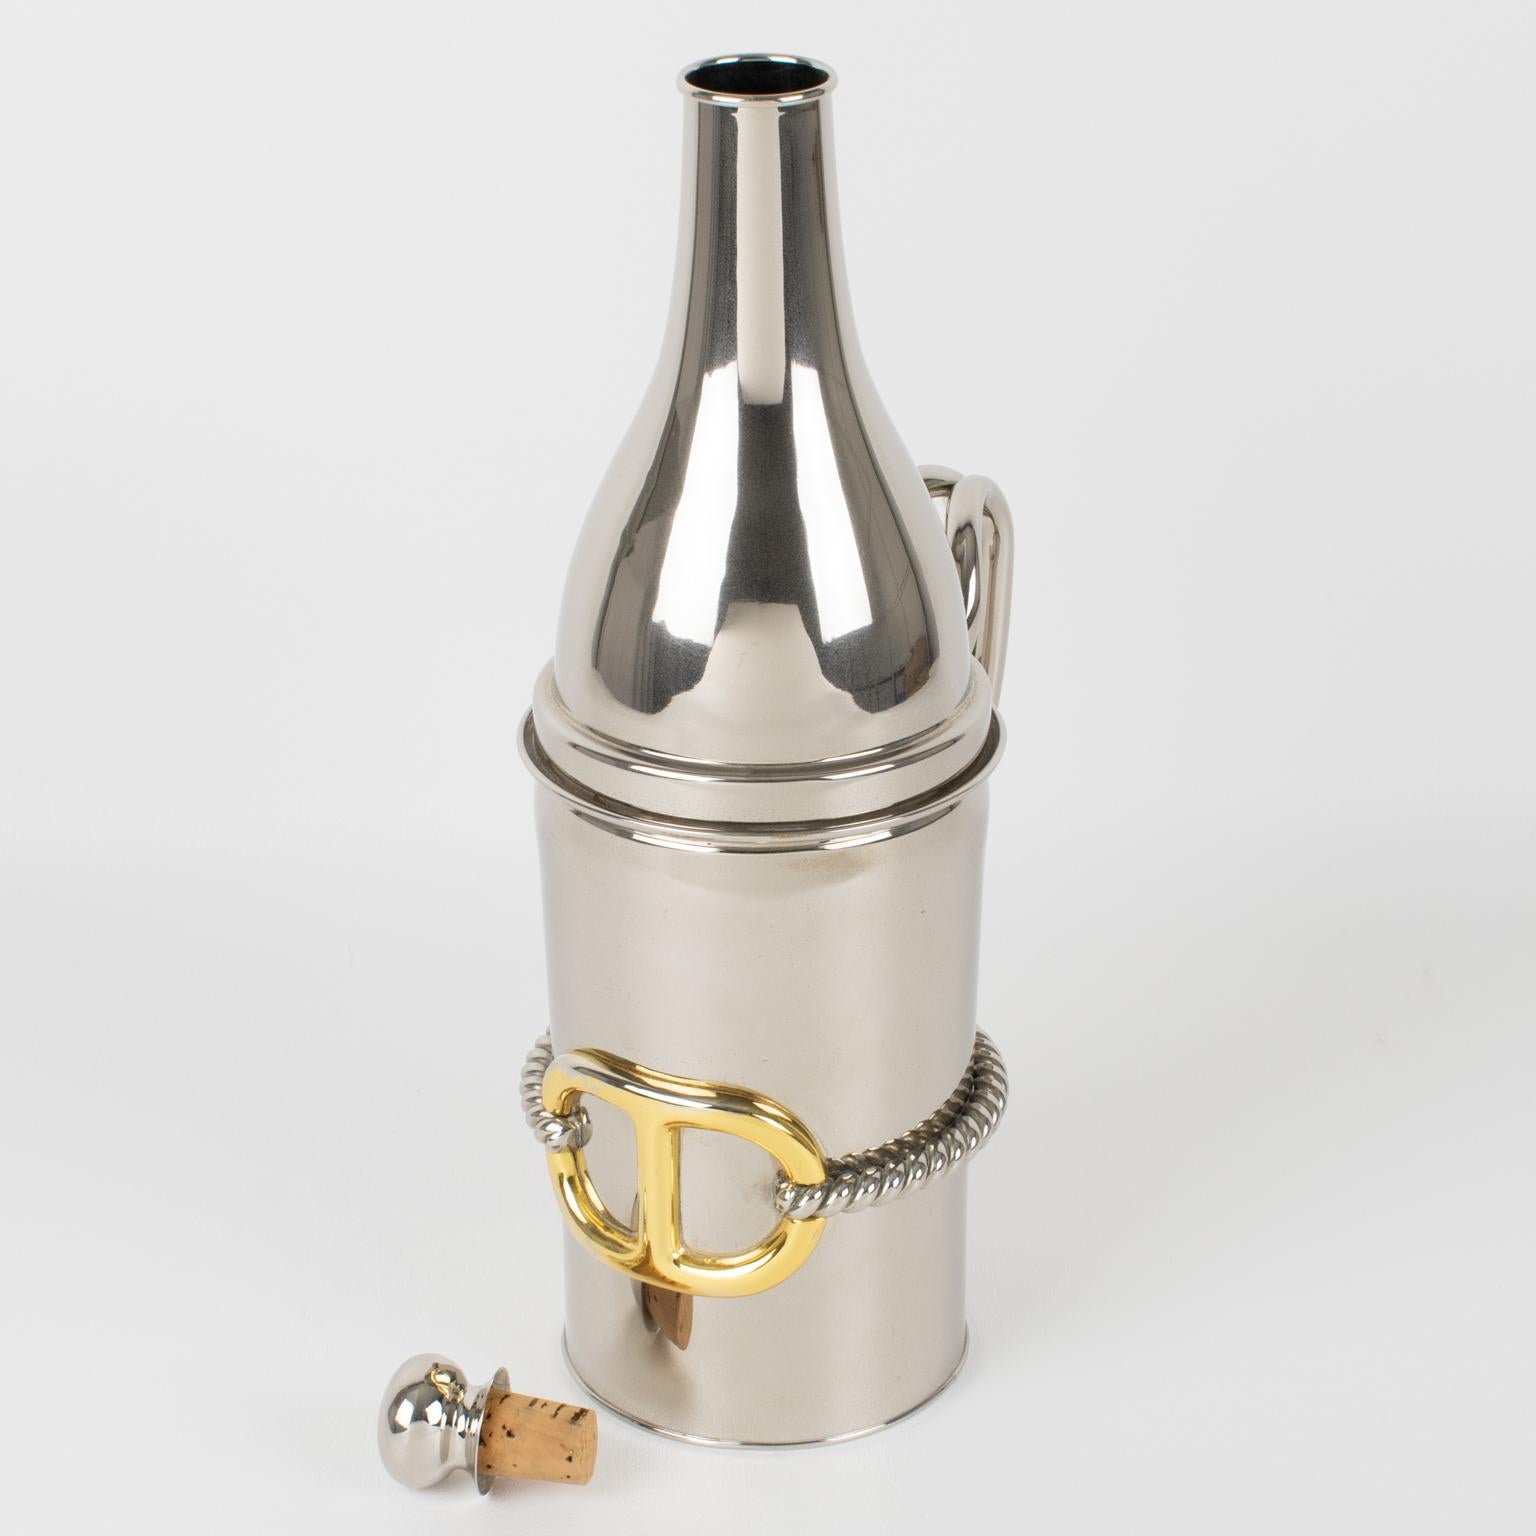 Gucci Italy Silvered and Gilt Metal Bottle Holder Decanter with Rope In Good Condition For Sale In Atlanta, GA